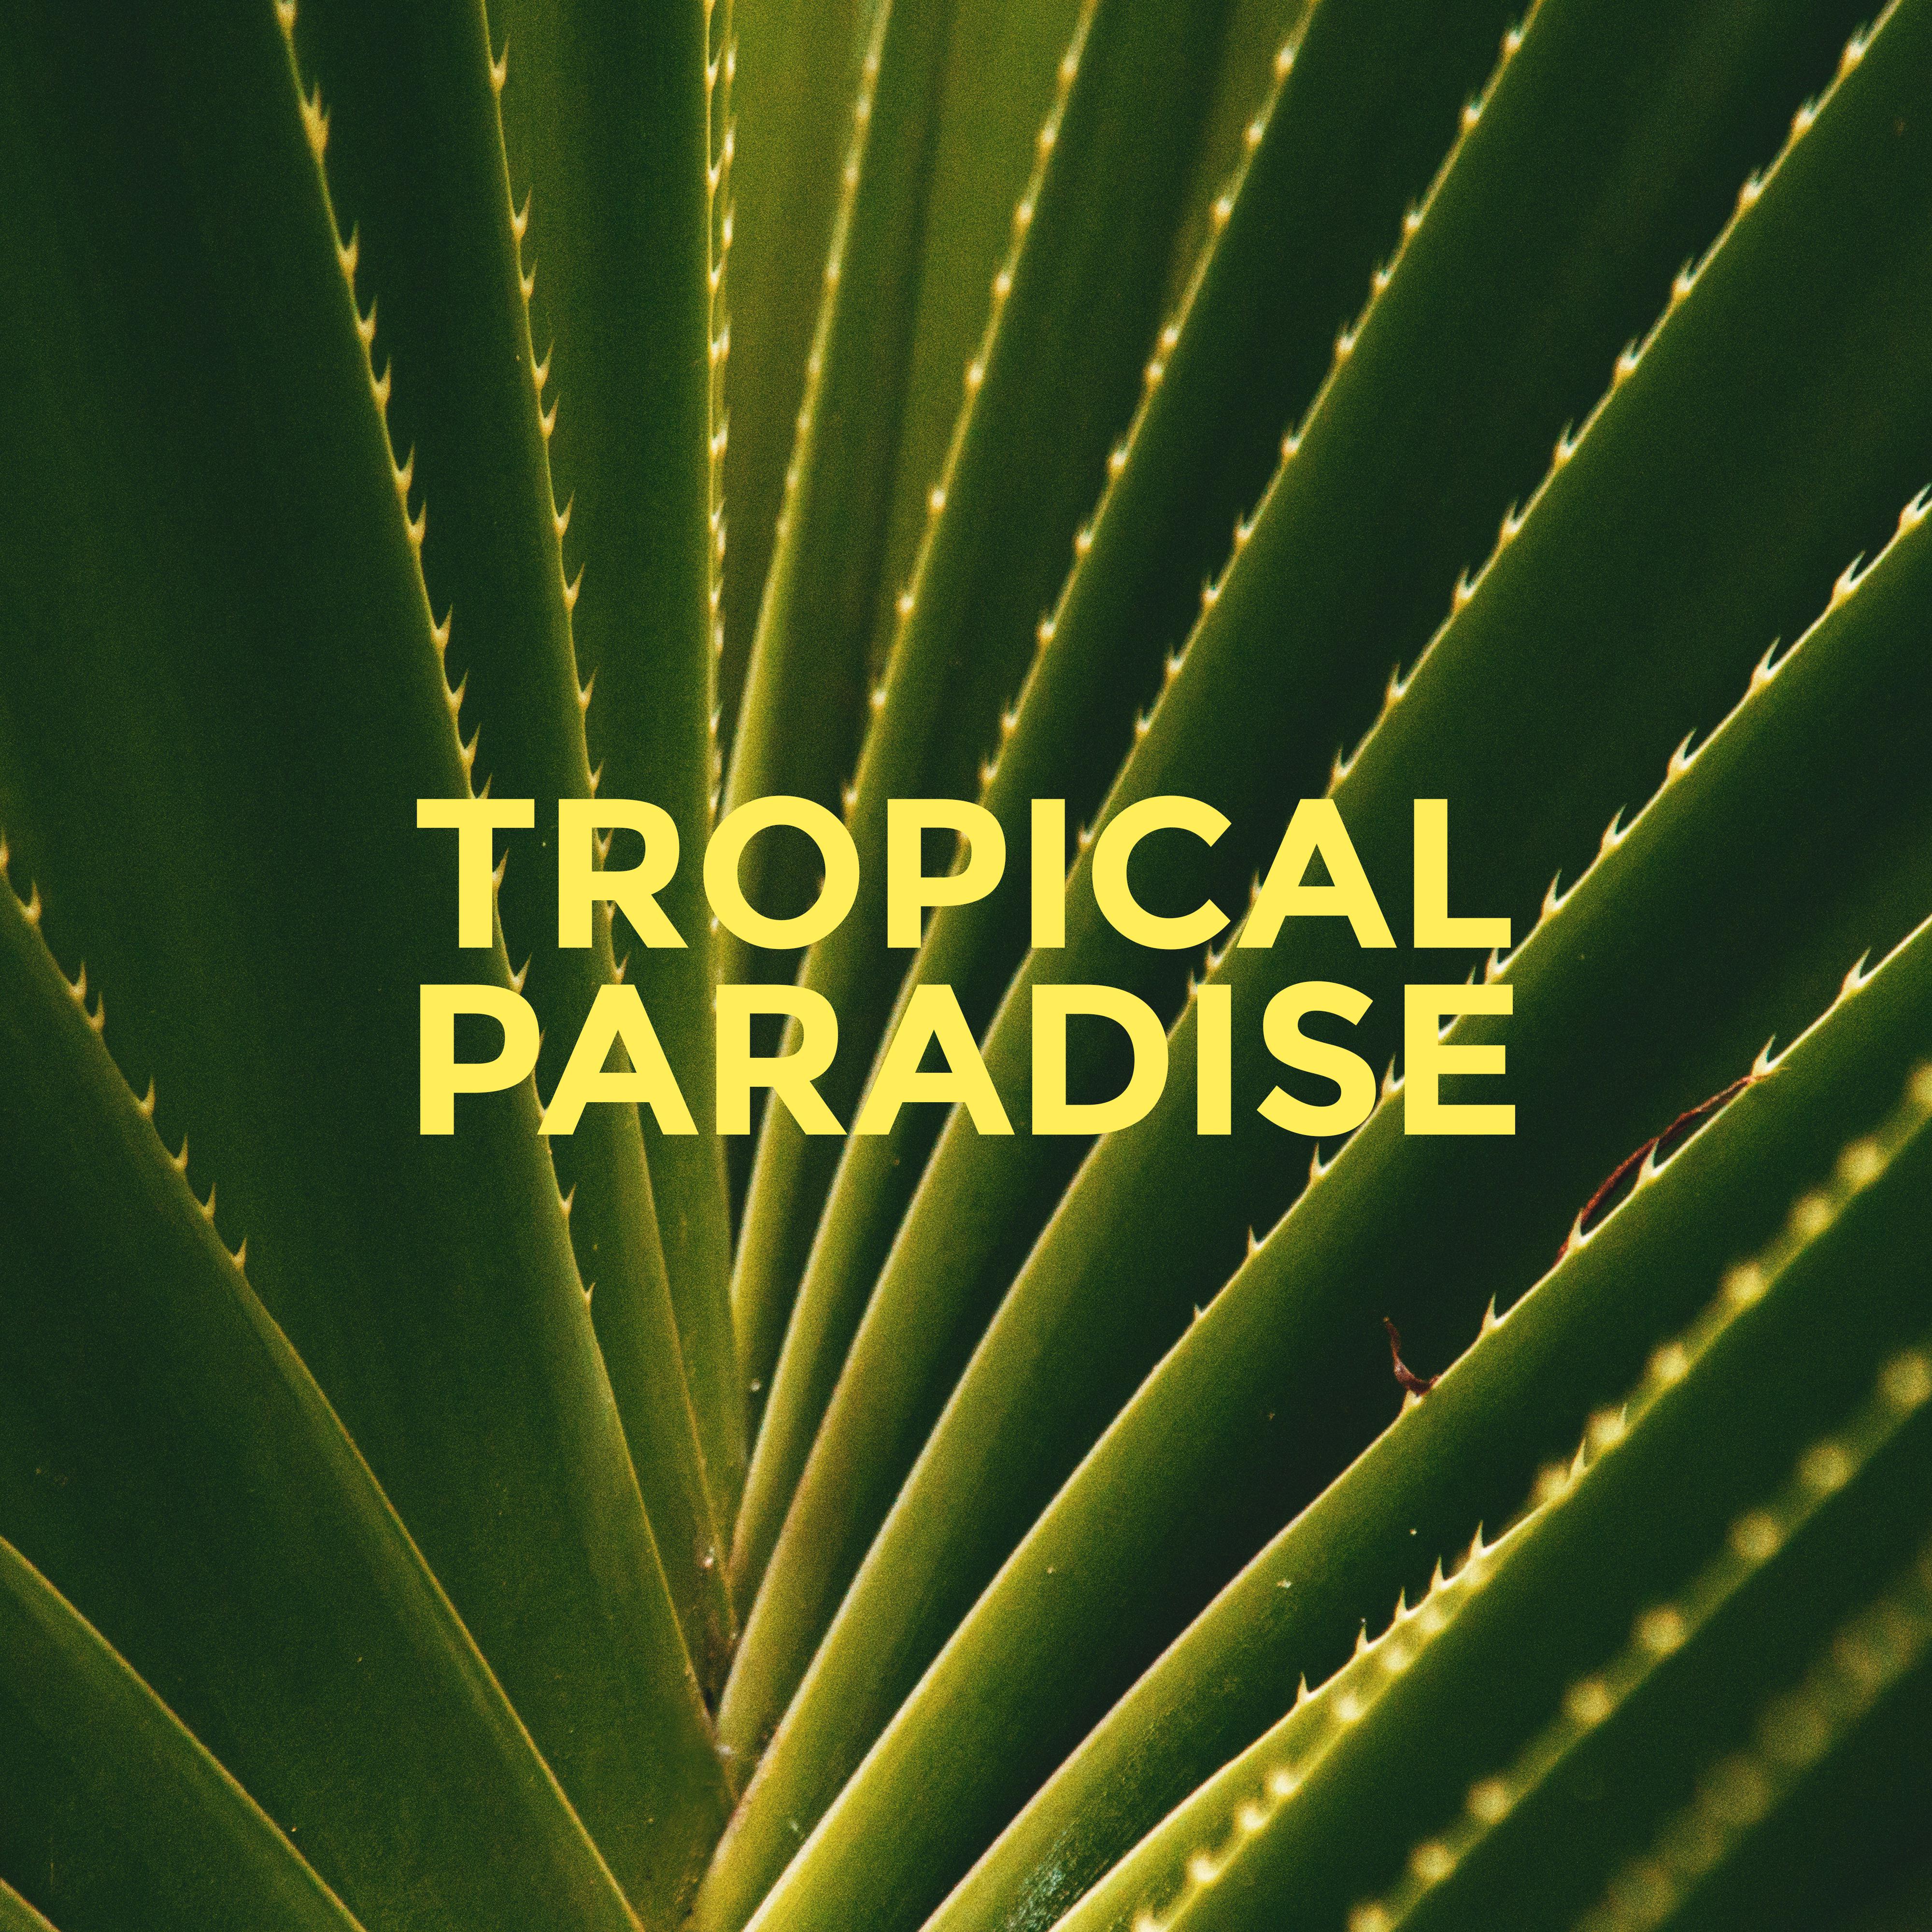 Tropical Paradise – Summer Music 2019, Fresh Relaxing Chill, Lounge Music, Peaceful Chillout Melodies, Deep Vibes, Beach Music